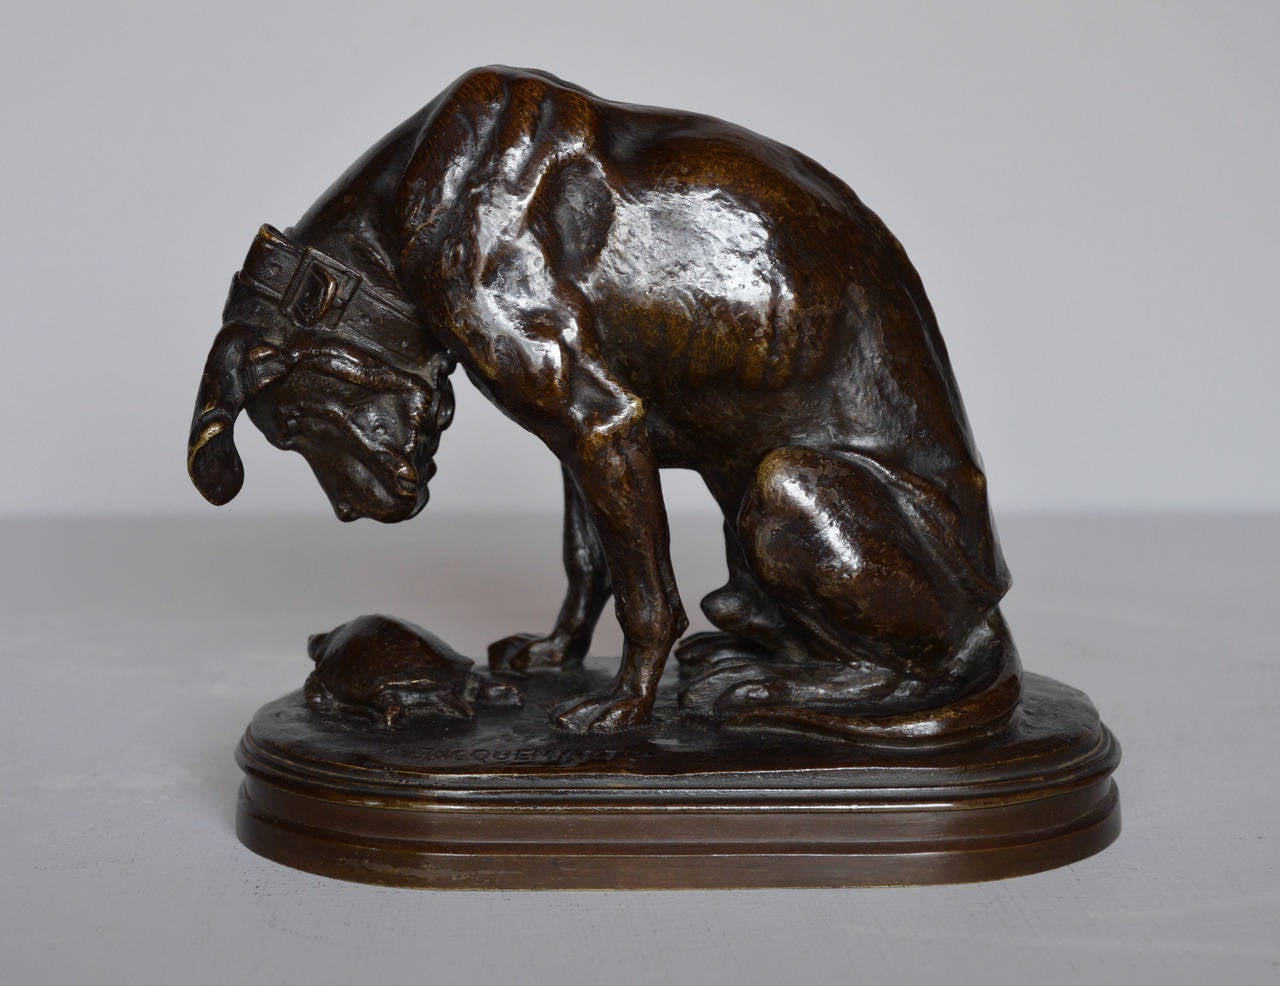 Henri Jacquemart
French, (1824-1896)
Bronze, signed ‘A. Jacquemart’
Height: 6 inches

A good quality bronze sculpture of a bloodhound closely watching a tortoise by Henri Alfred Jacquemart. This delightful study captures the curiosity of the